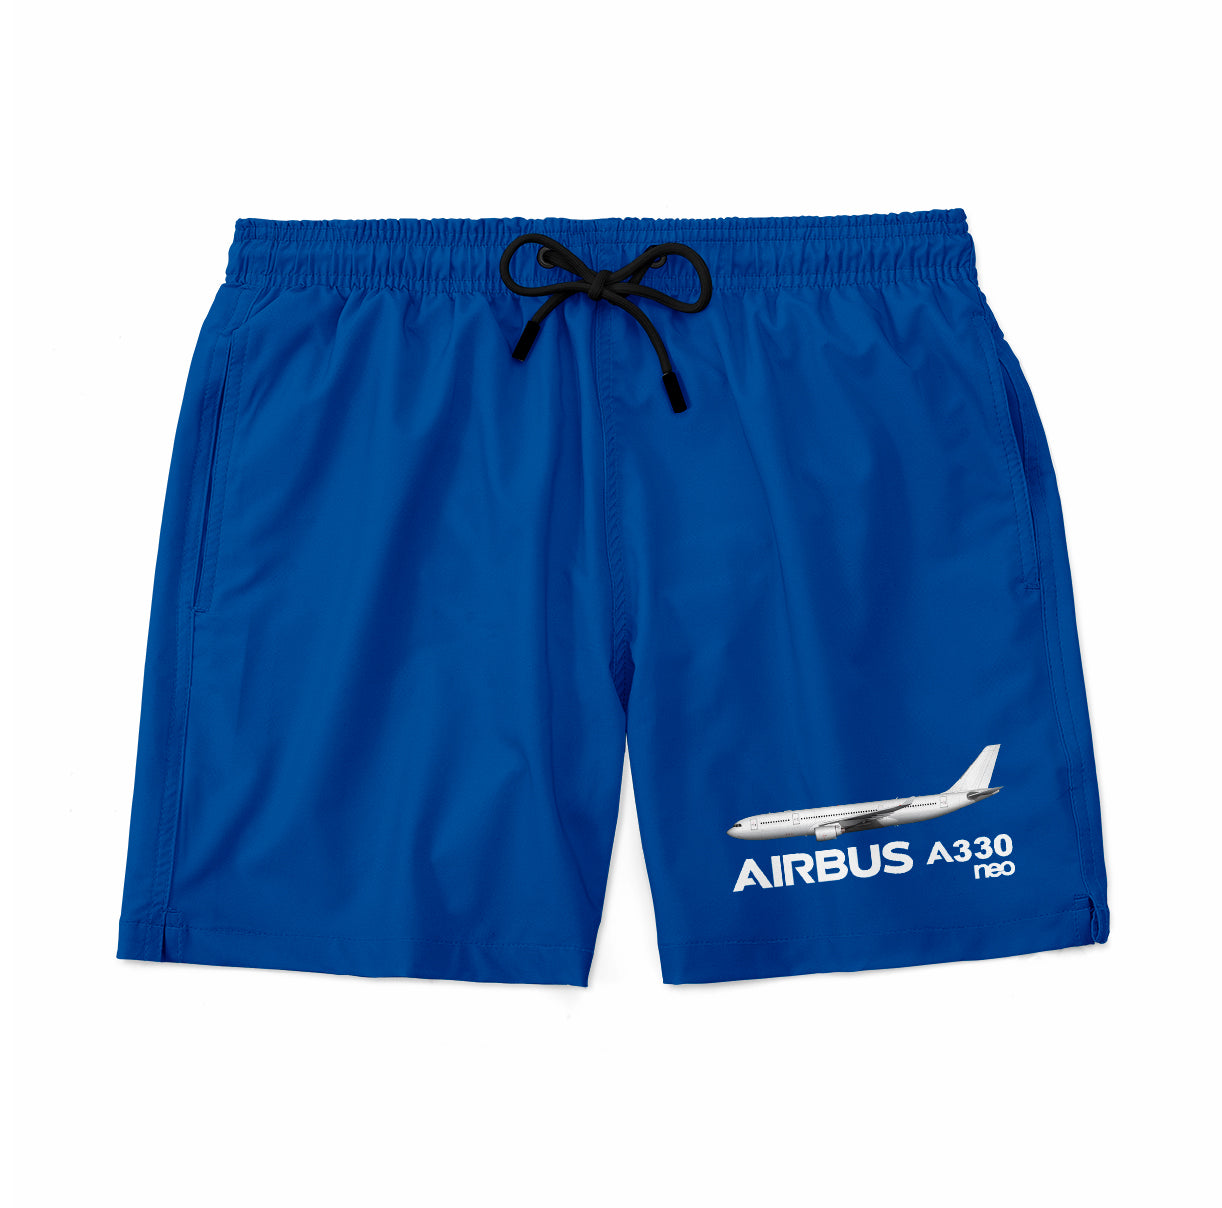 The Airbus A330neo Designed Swim Trunks & Shorts